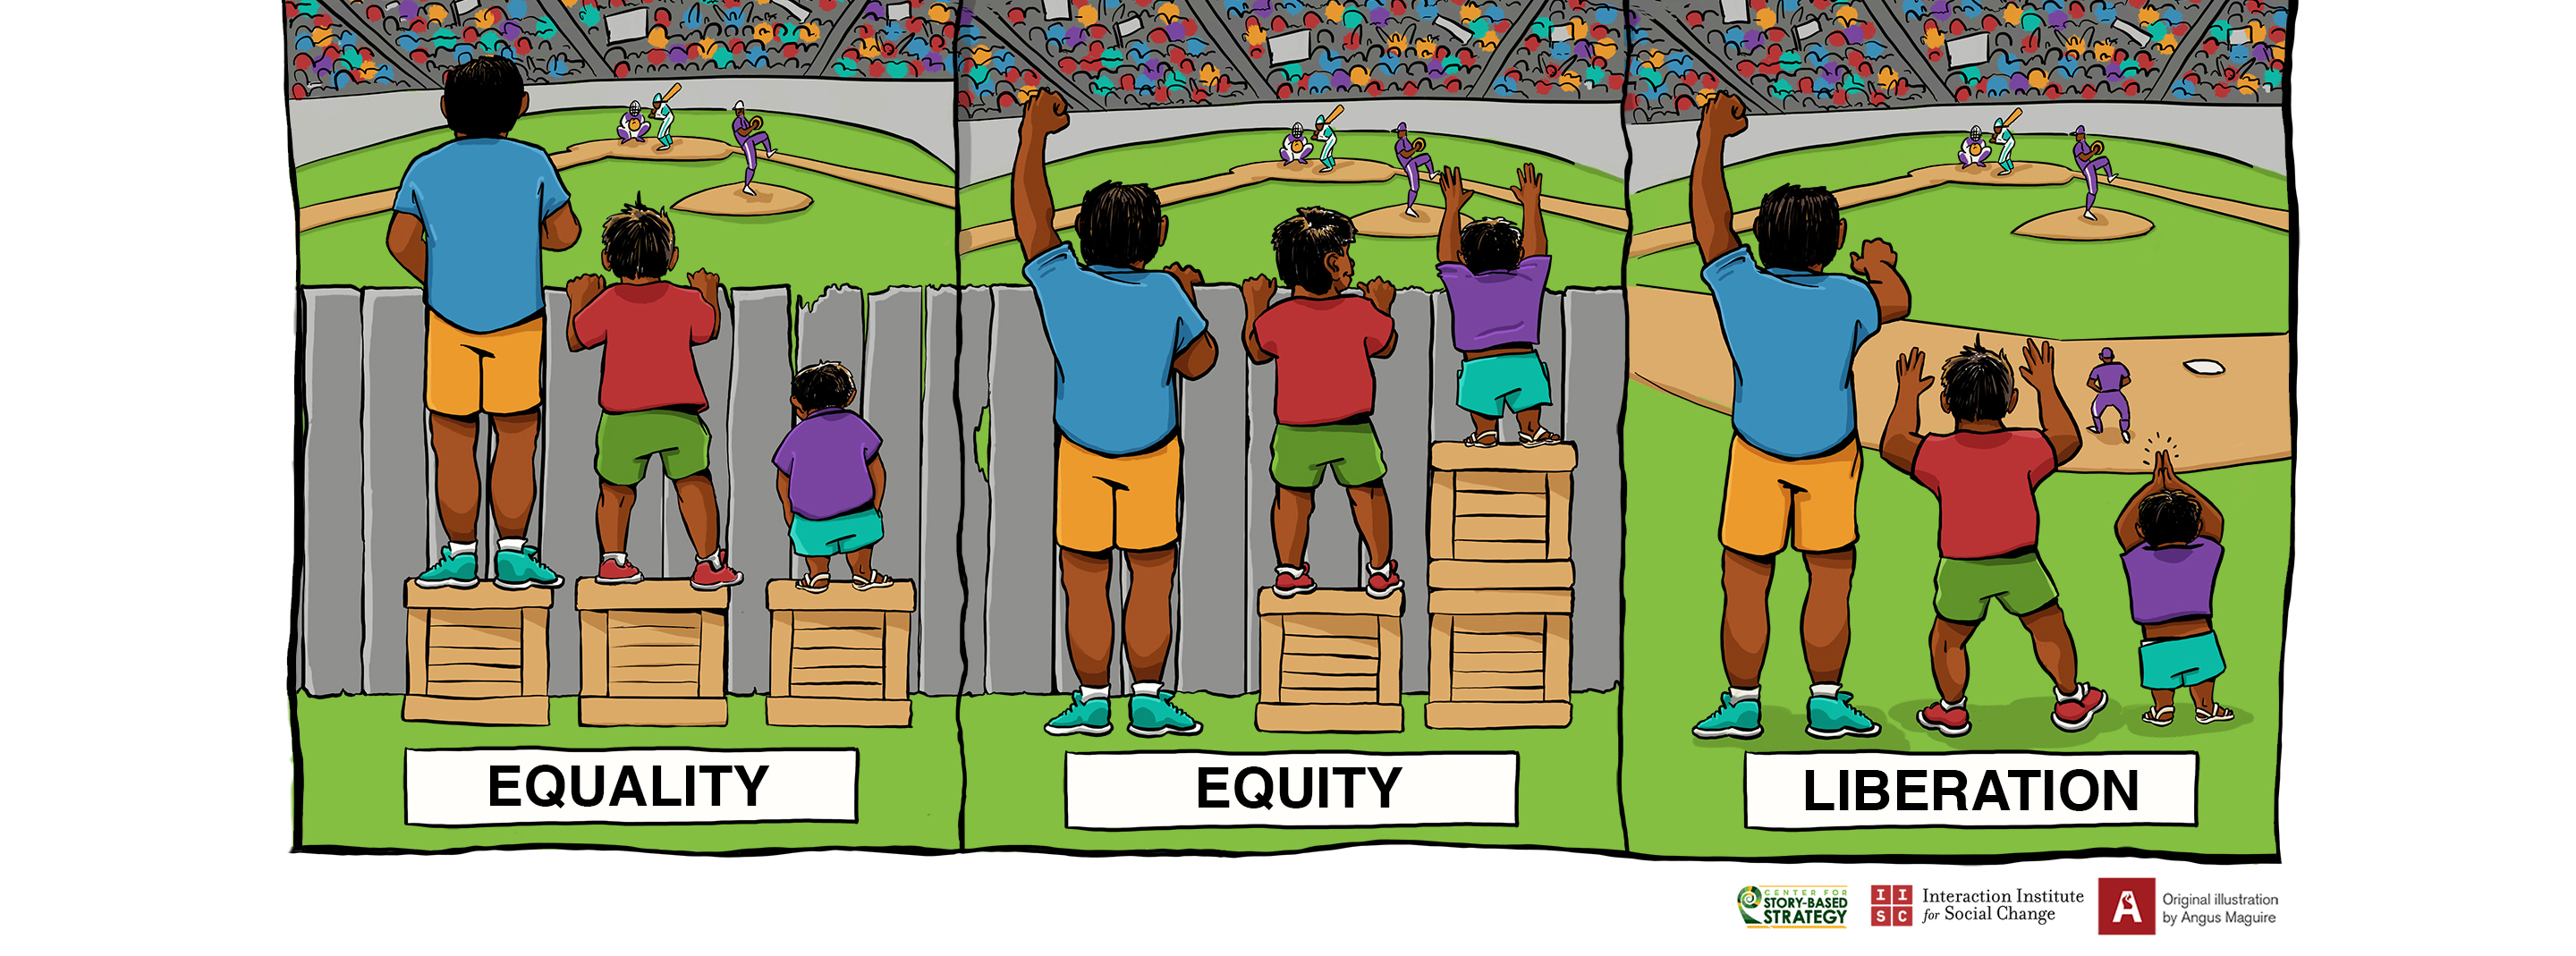 A cartoon representation of equality and equity